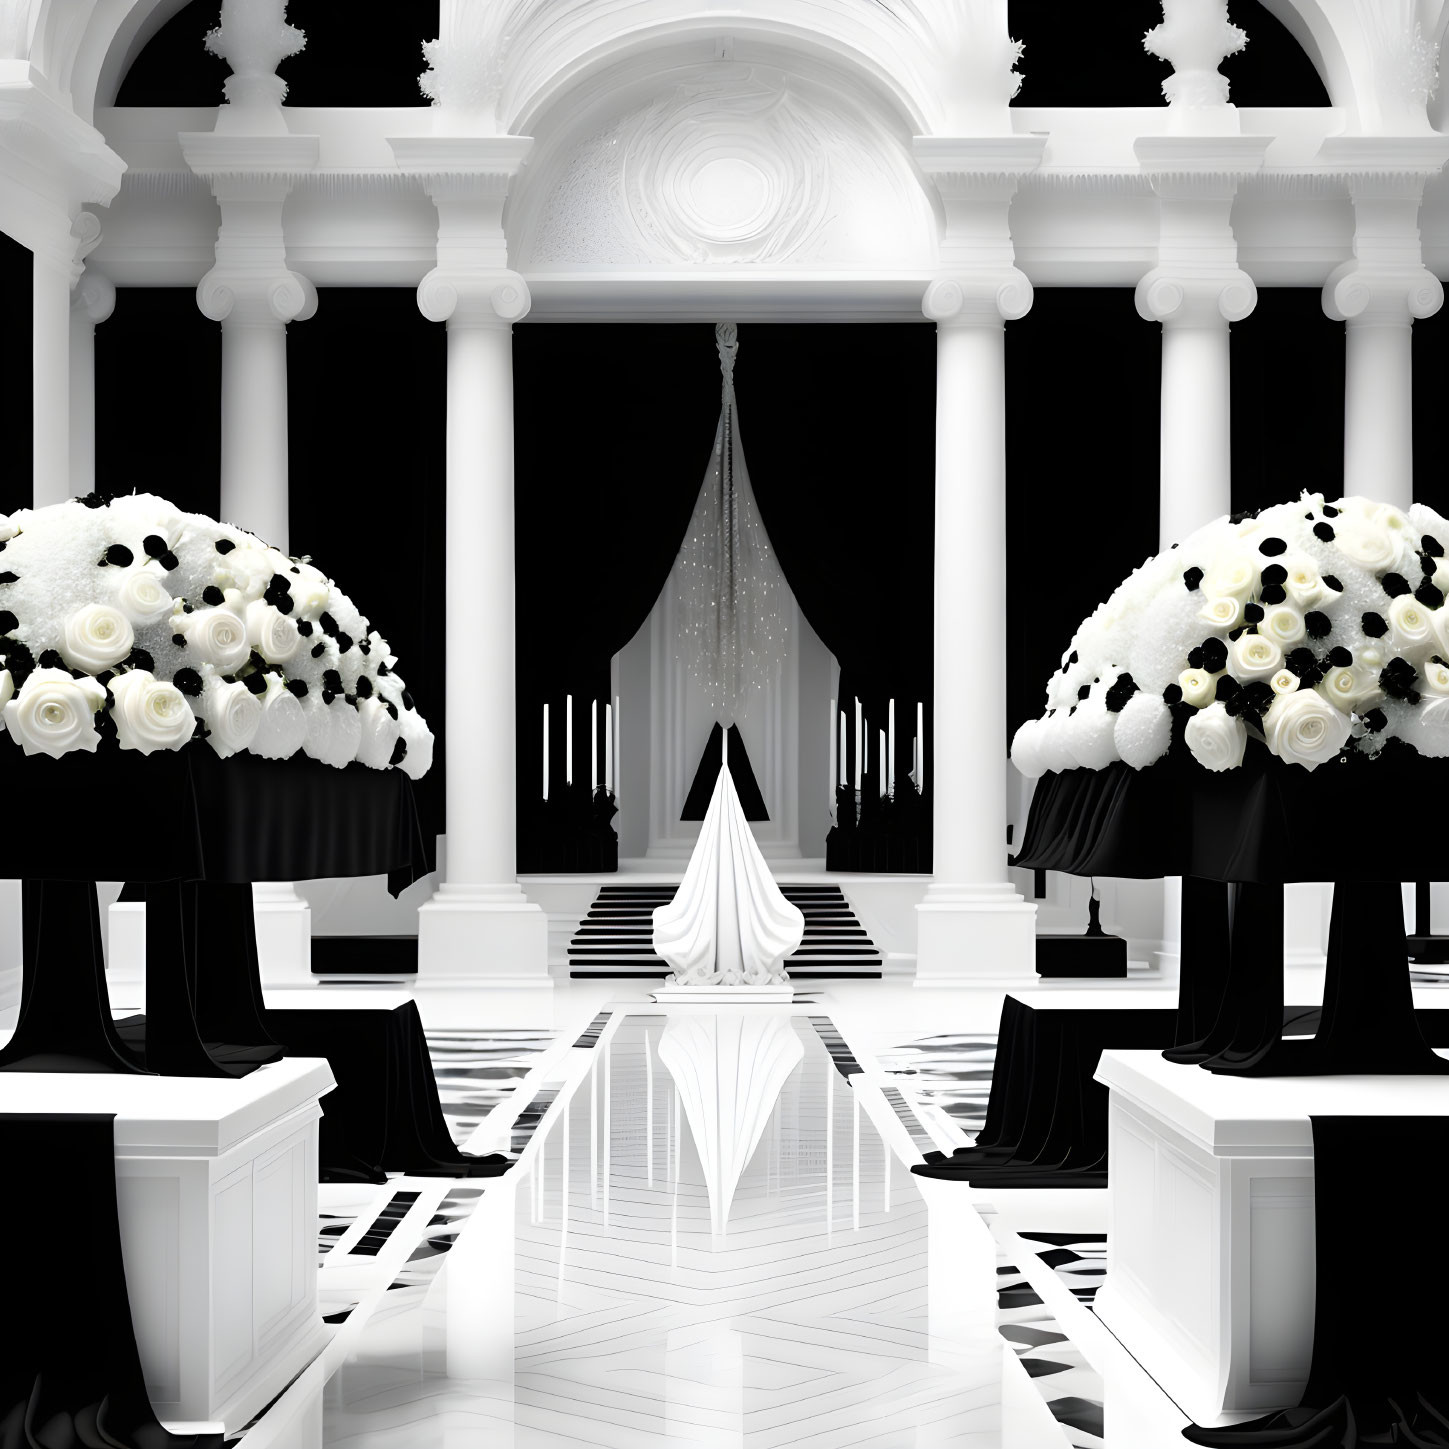 Luxurious Black and White Interior with Columns and Floral Arrangements